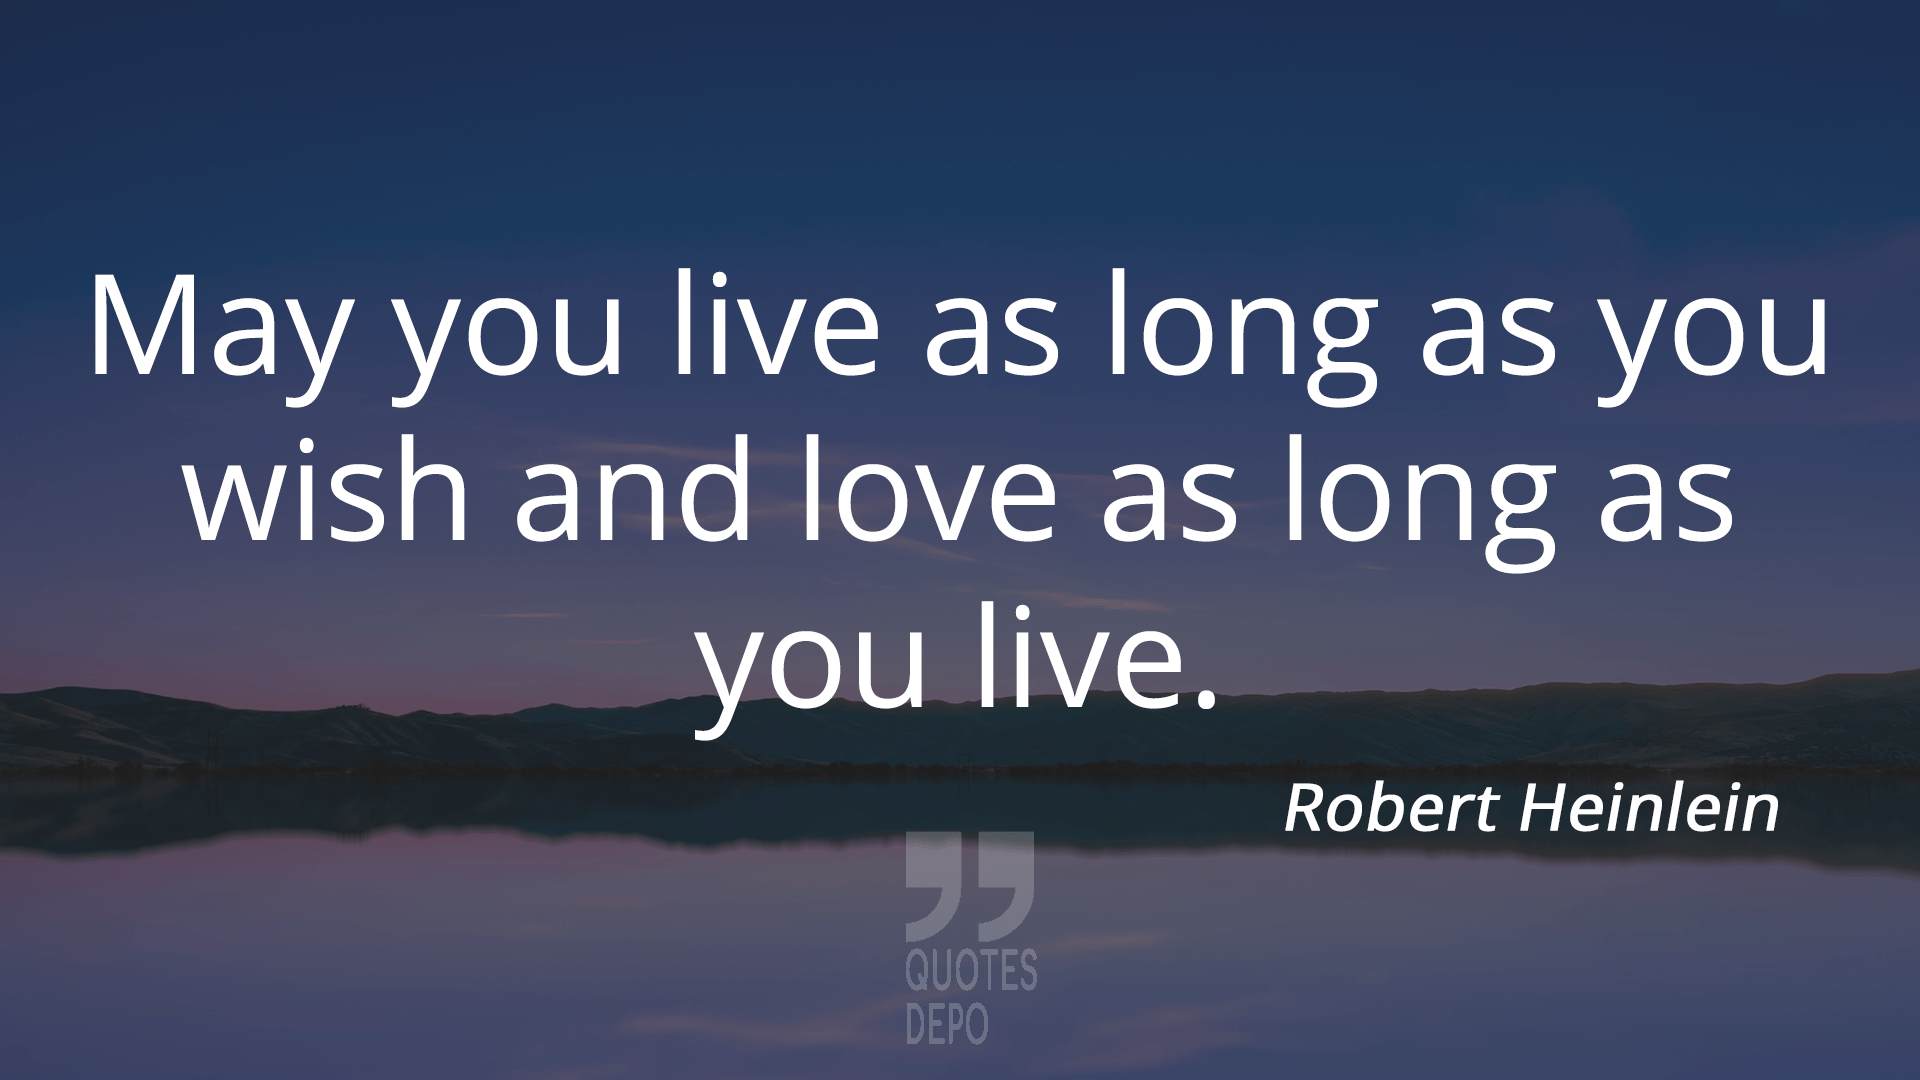 may you live a long life - robert heinlein quotes